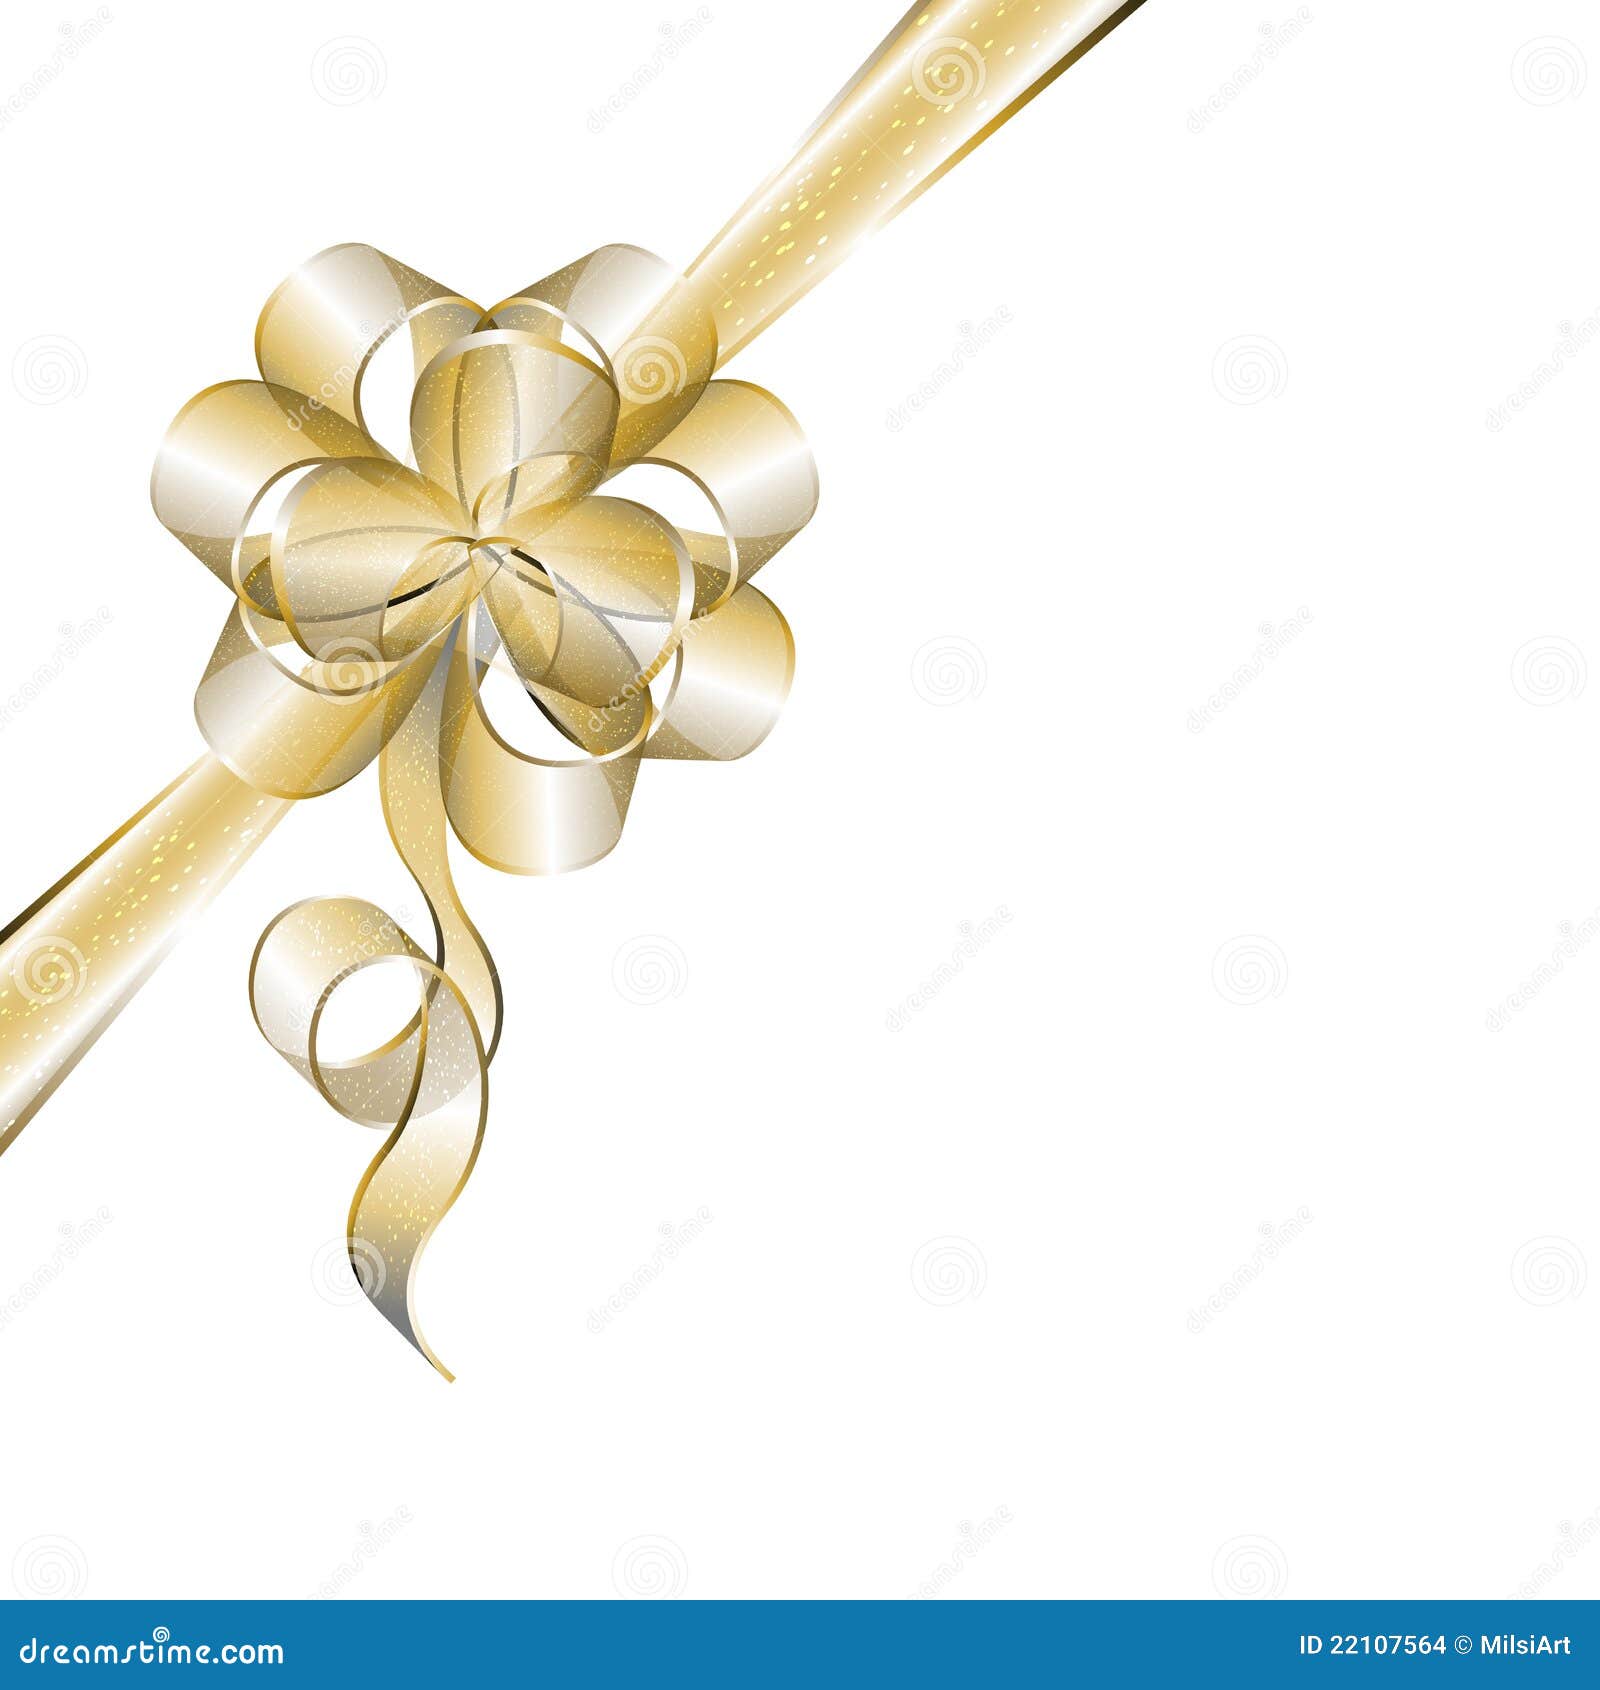 Gold Bow Hd Transparent, Gold Bow Poster Background, Bow, Golden, Golden Bow  PNG Image For Free Download